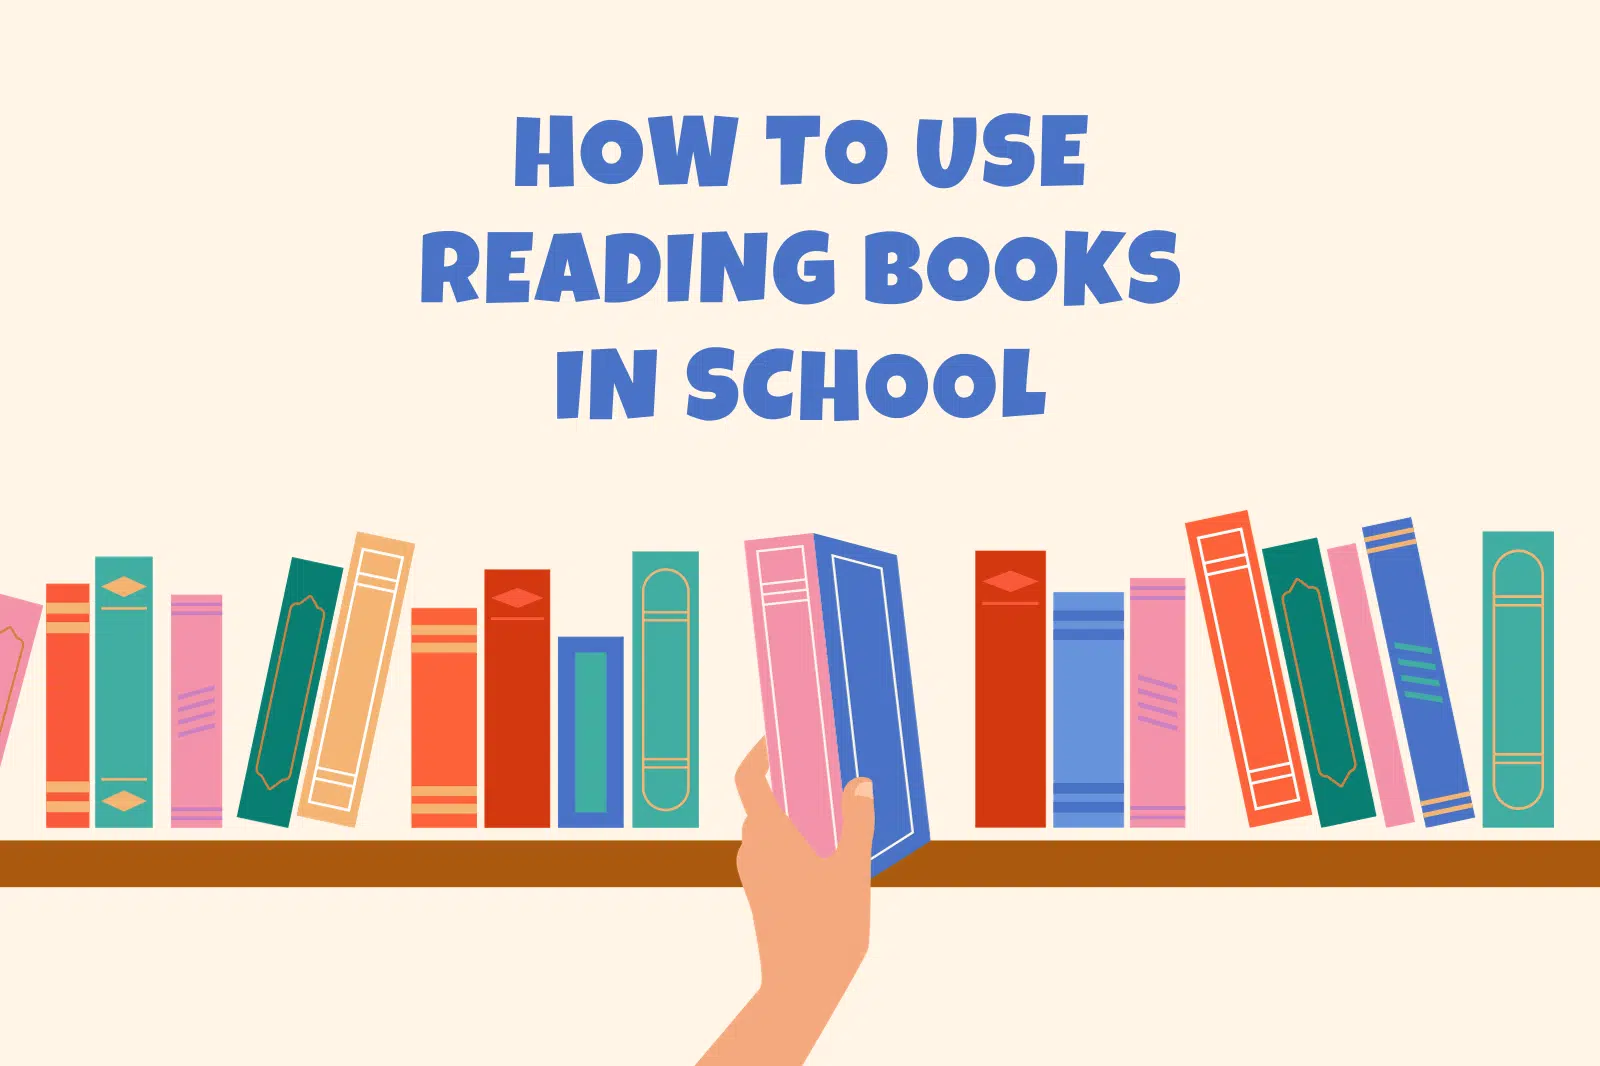 How to Use Reading Books in School